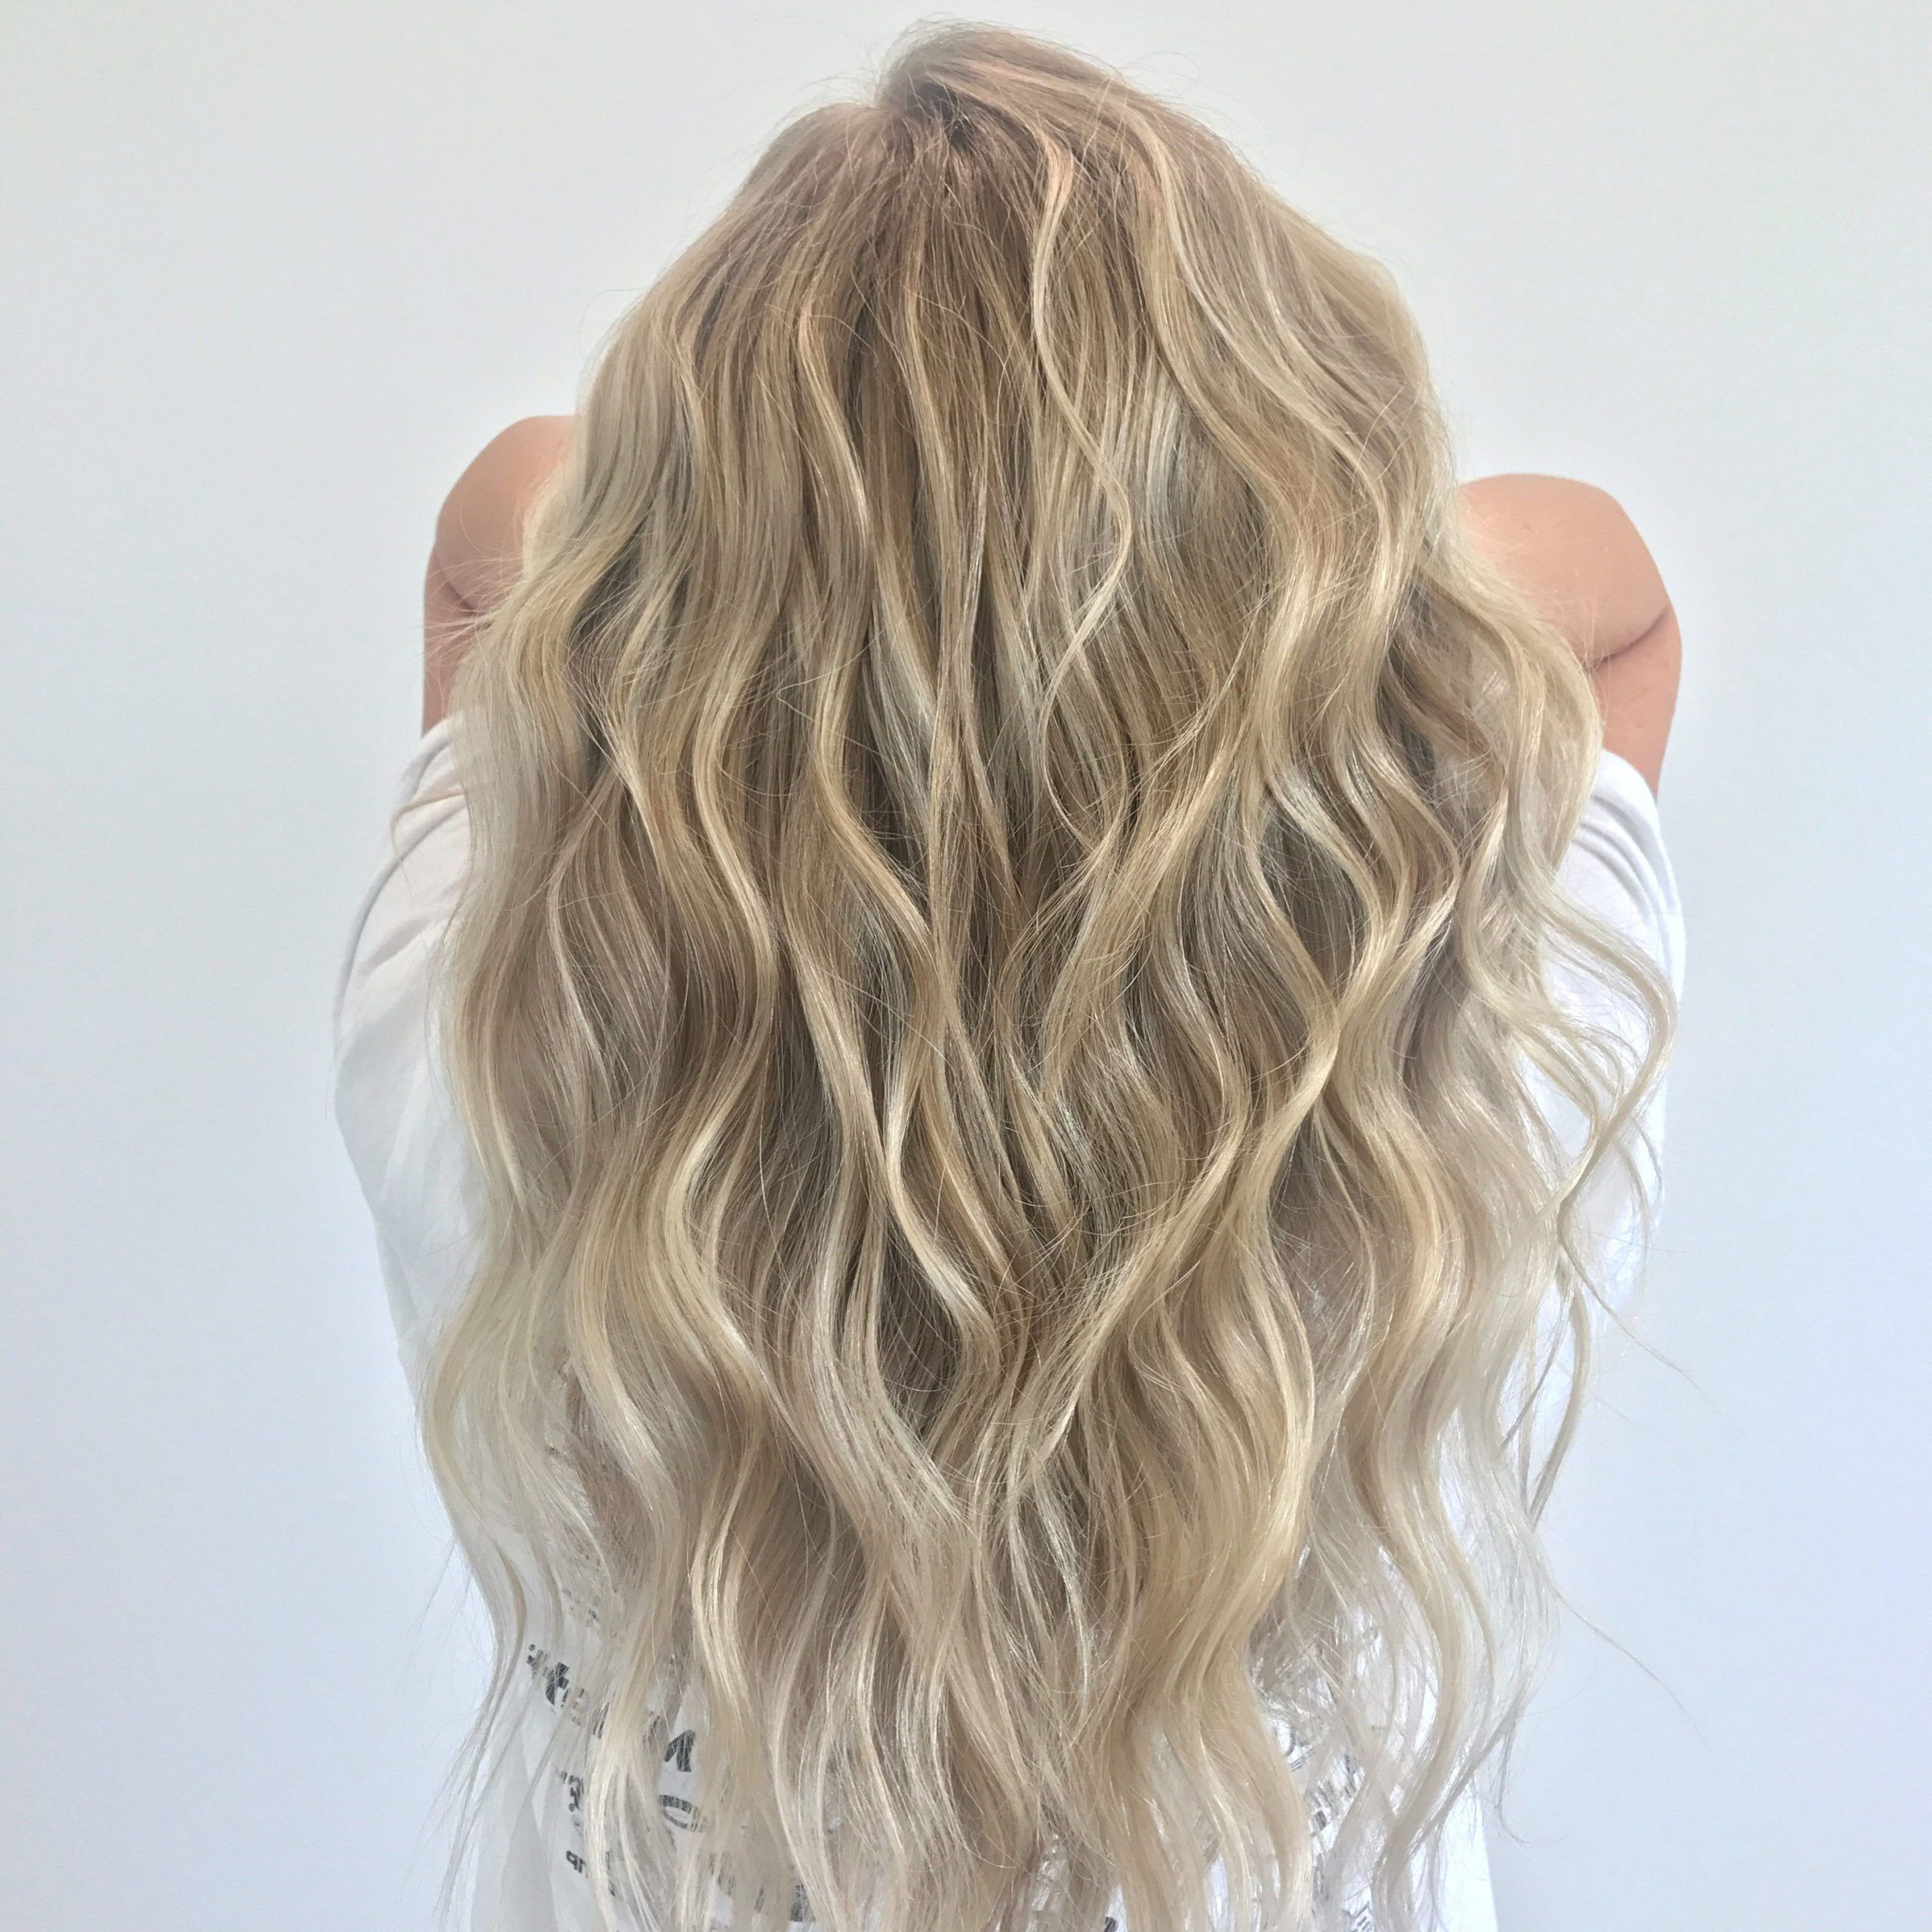 Fashionable Icy Blonde Beach Waves Haircuts With Platinum Blonde, Blonde Hair, Beach Waves, Long Hair, Balayage, Foilayage, Icy  Blonde, Hair Color Ideas (Gallery 19 of 20)